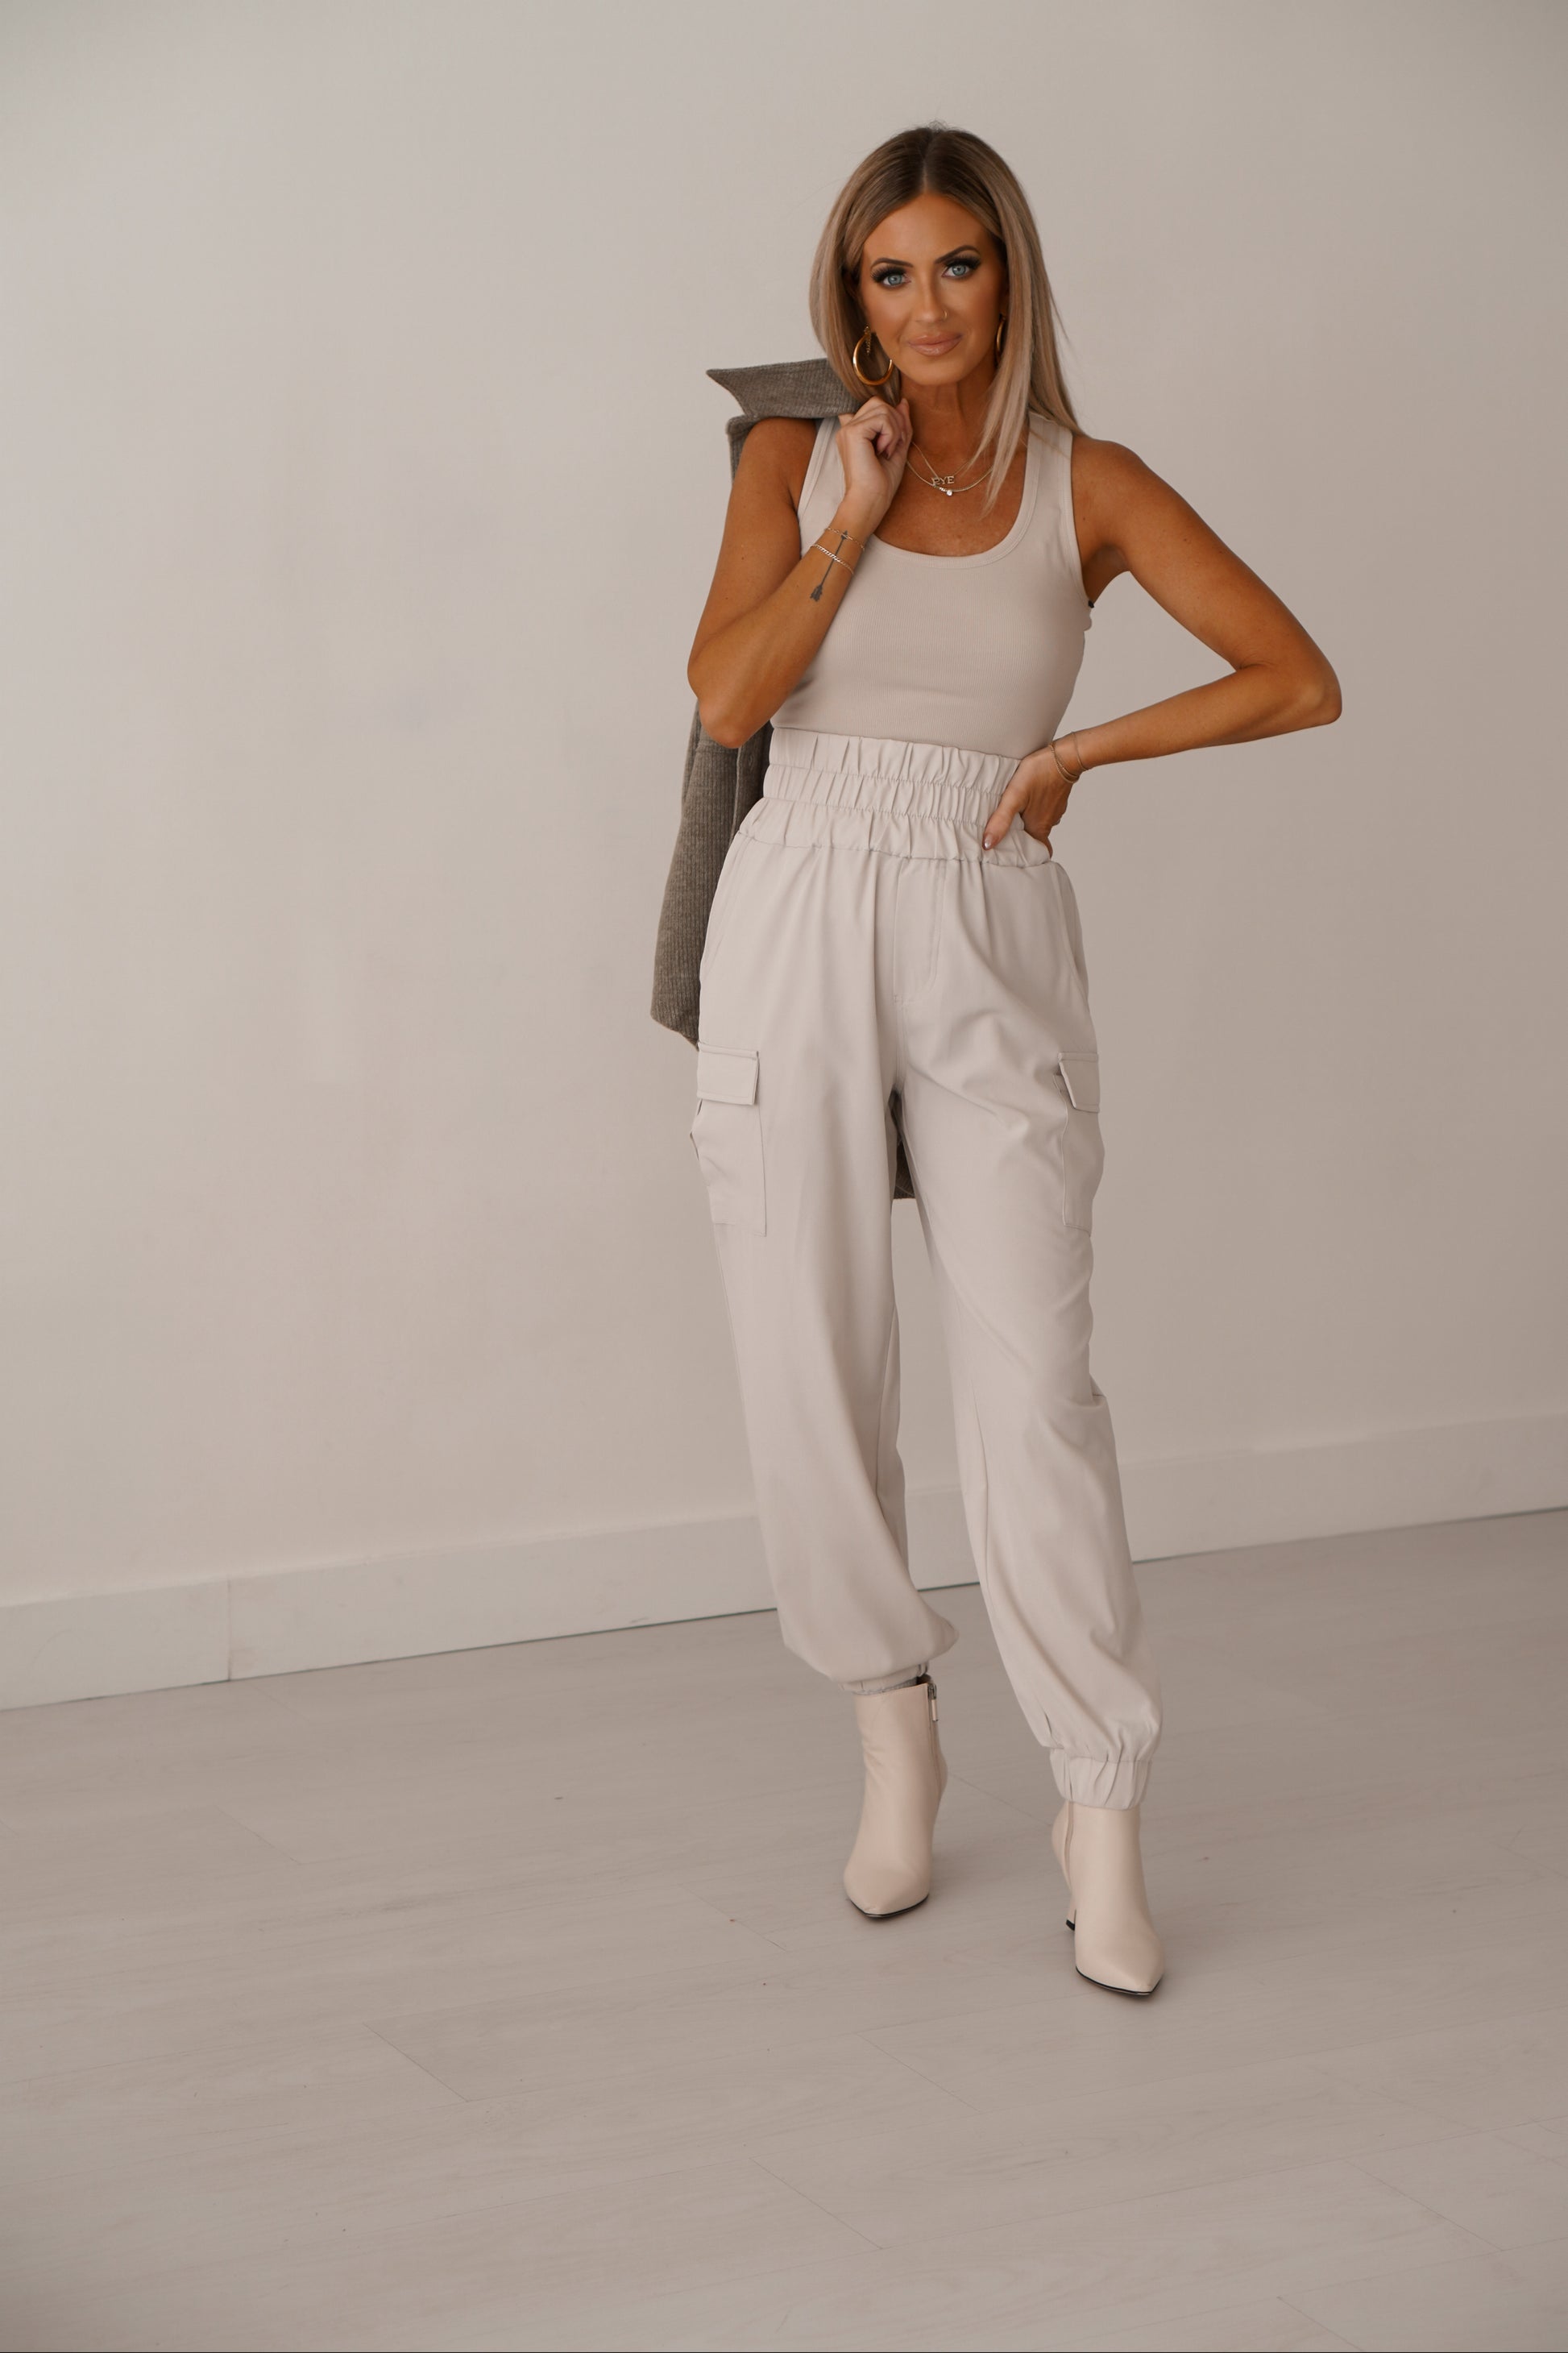 Blonde girl wearing cream cargo joggers holding green shacket over shoulder. She is standing in front of white wall. 